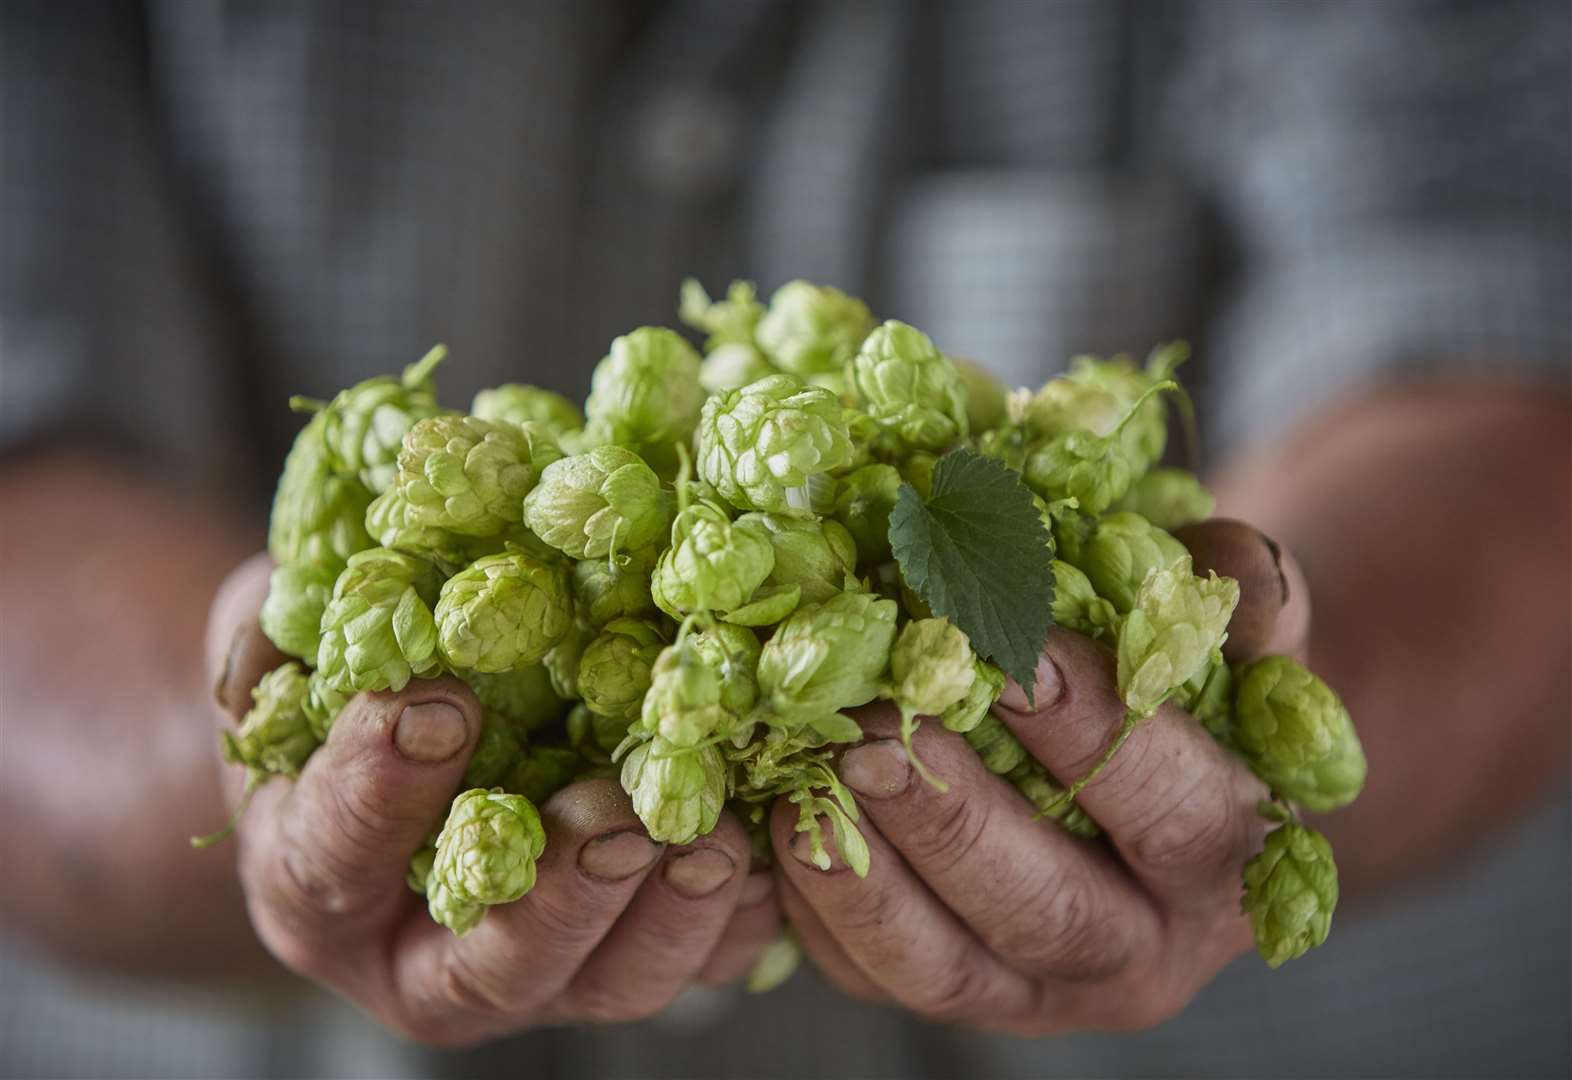 Celebrating the county's hop crop